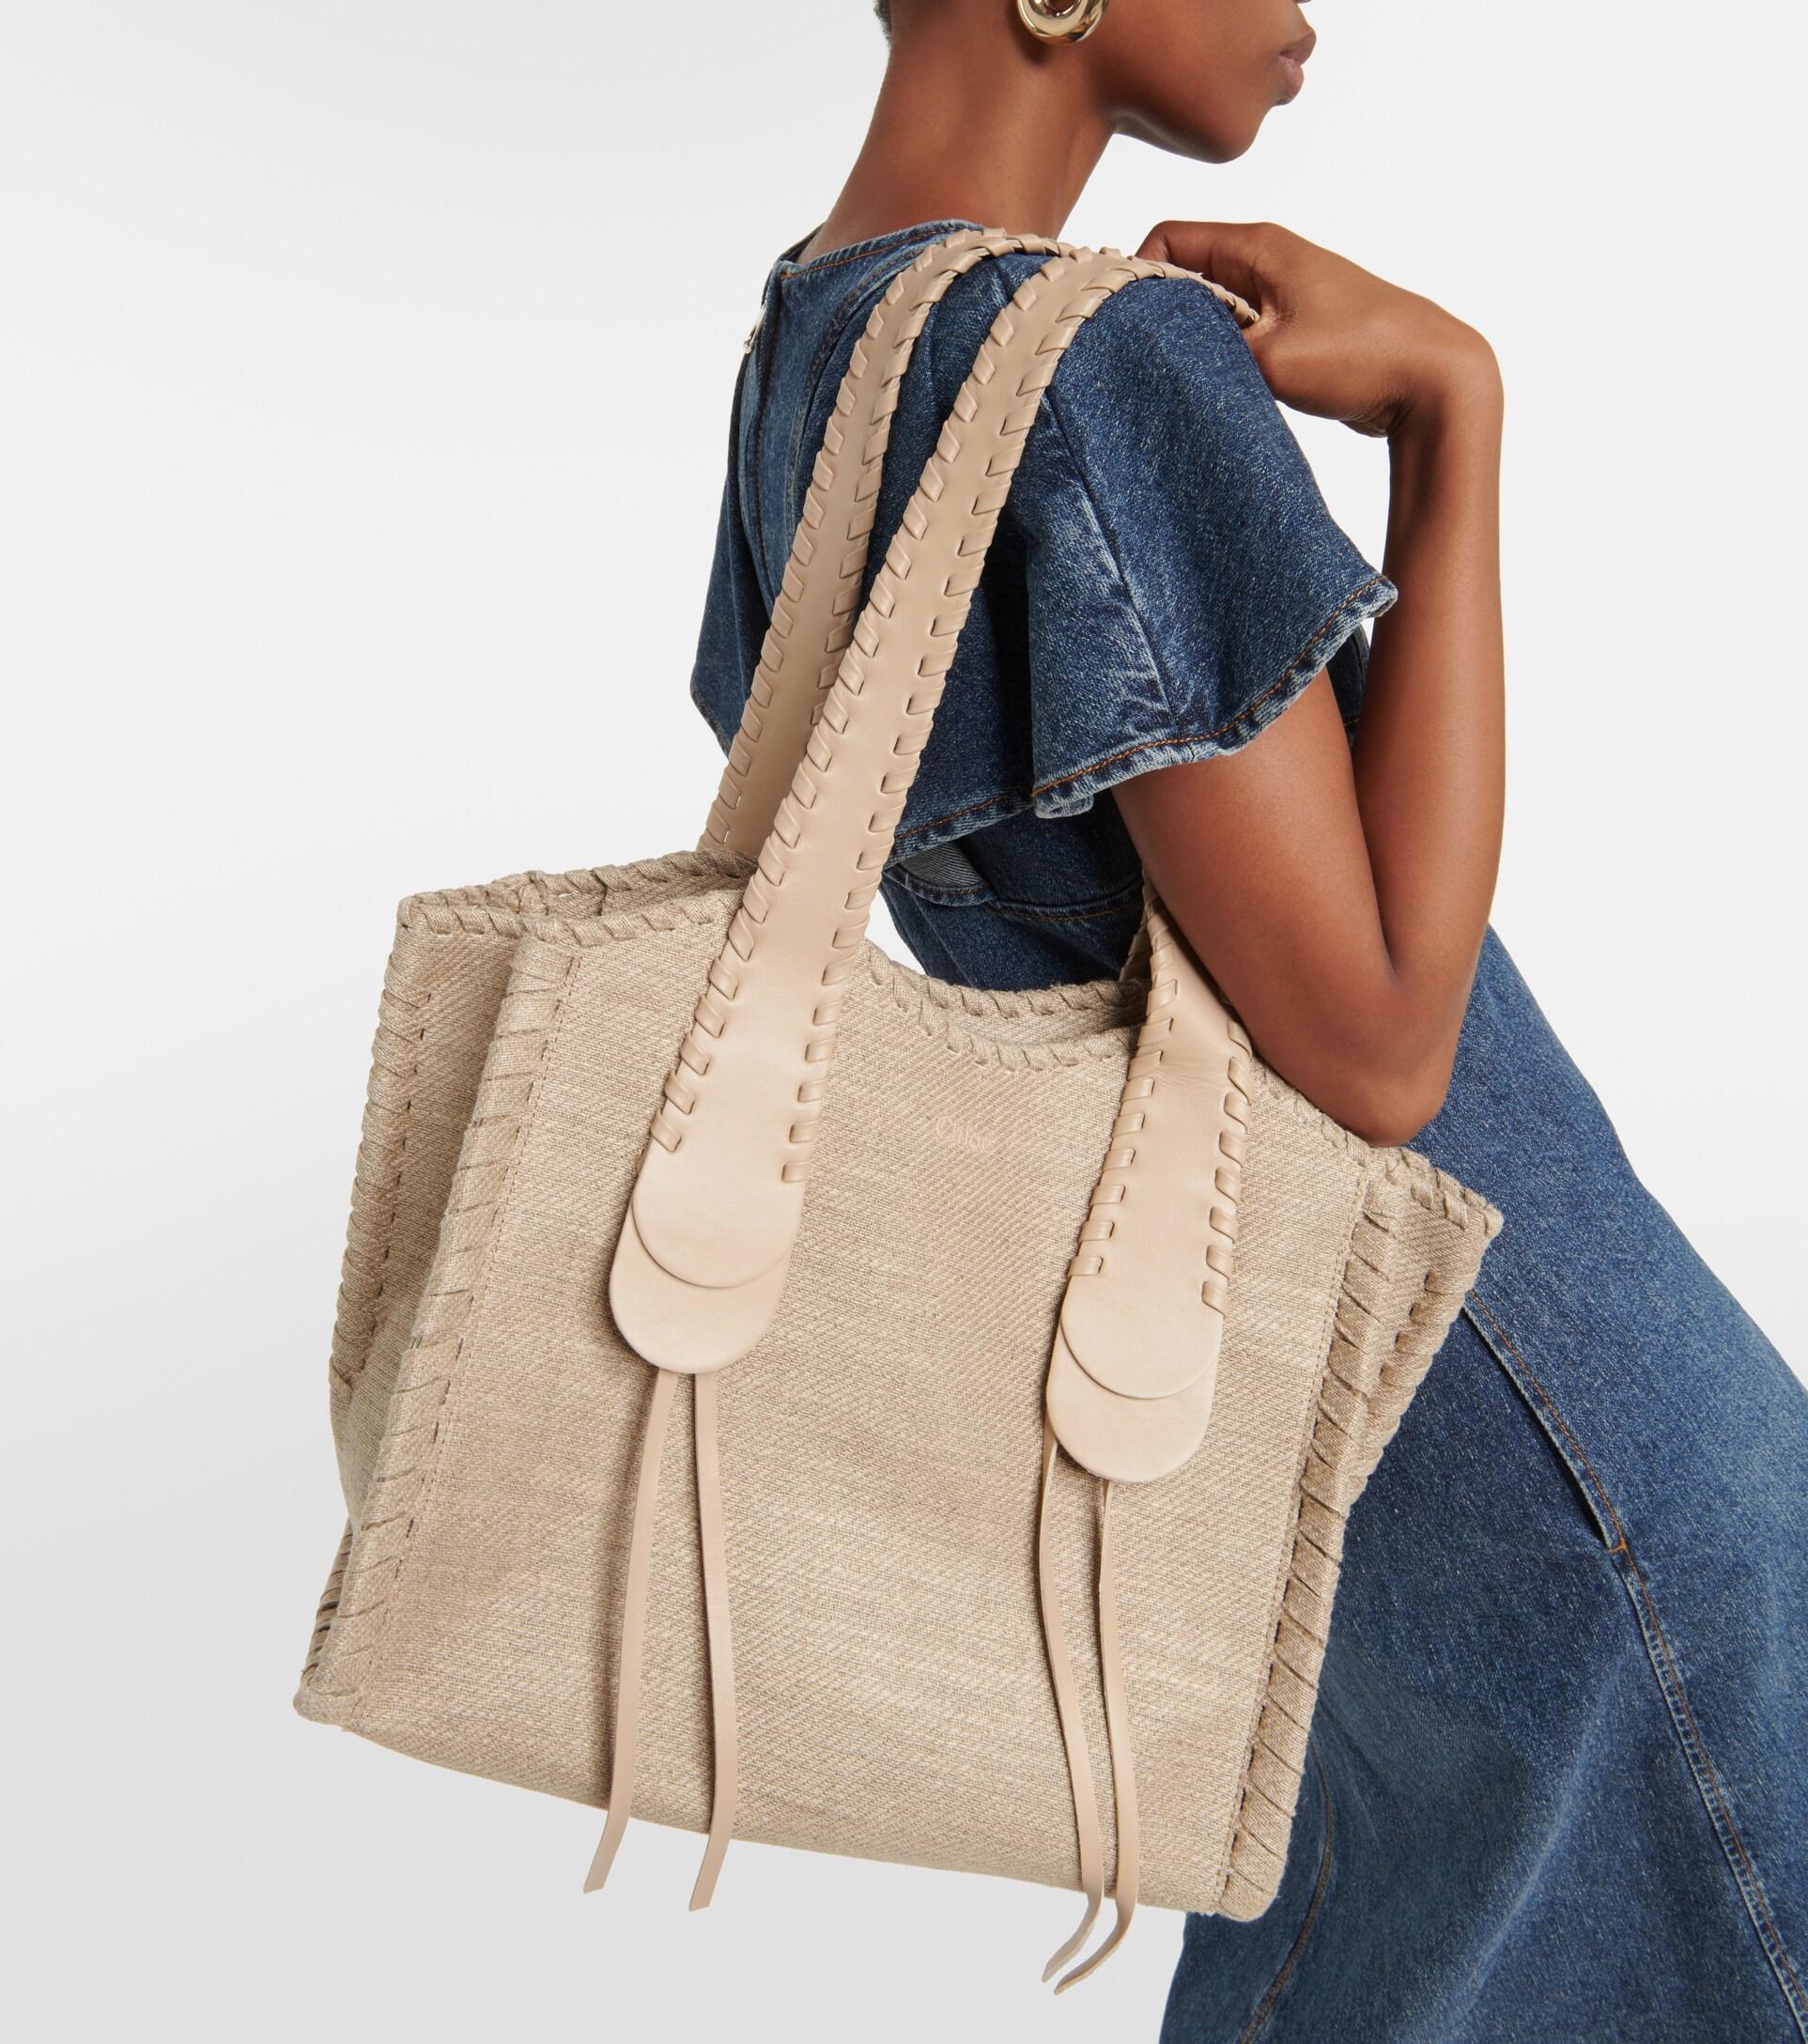 Chloé Mony Medium Canvas Tote Bag in Natural | Lyst